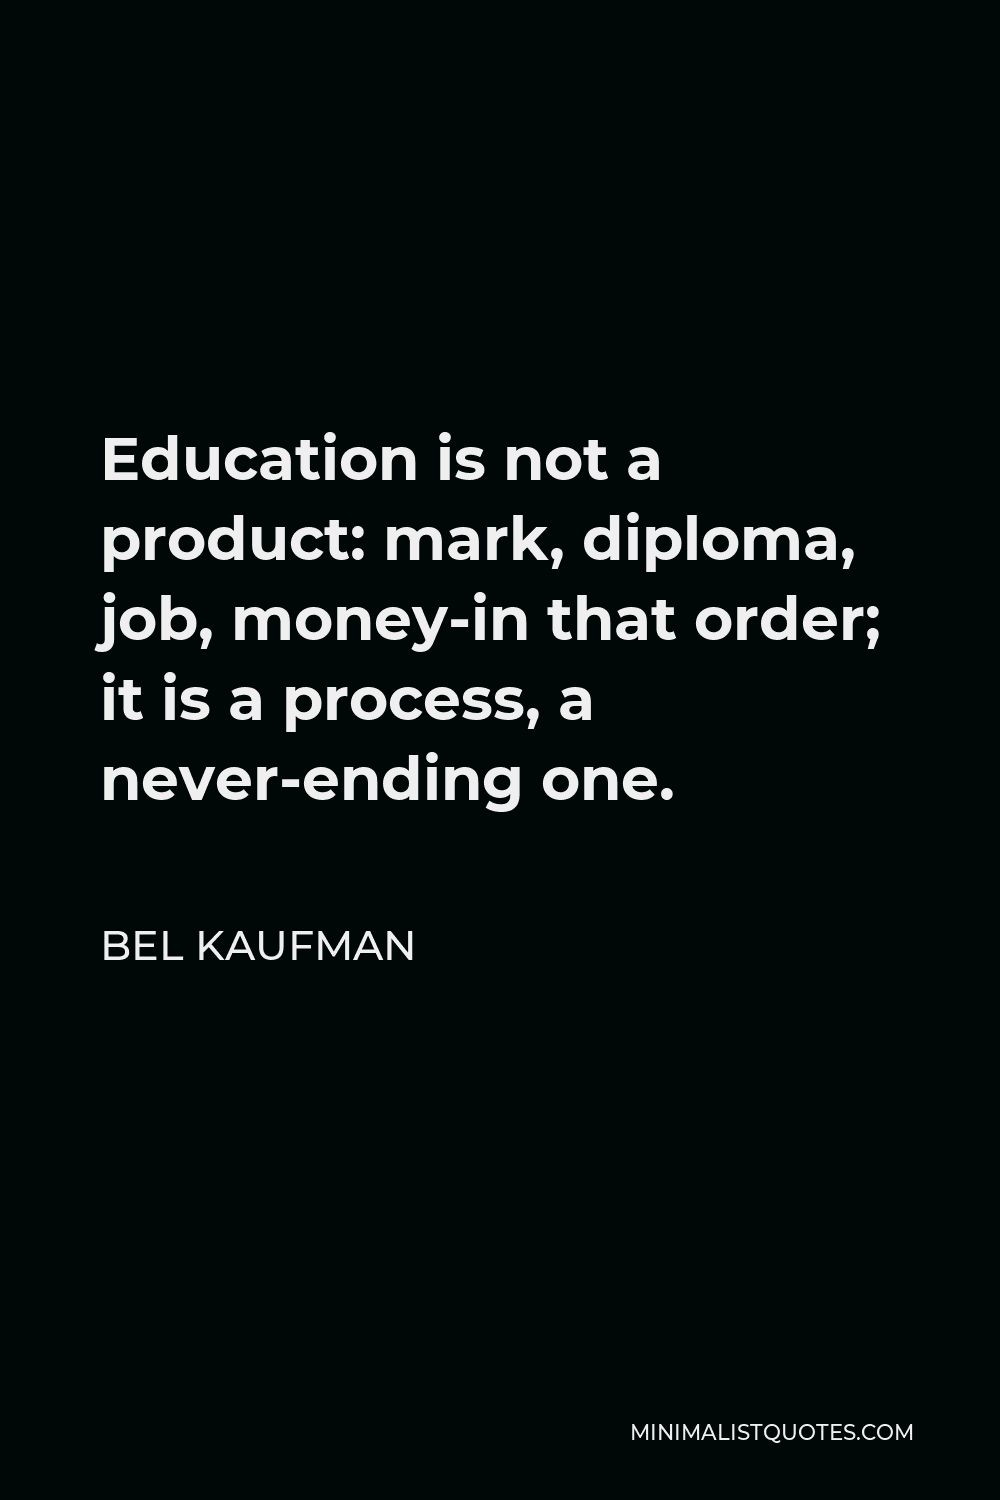 Bel Kaufman Quote - Education is not a product: mark, diploma, job, money-in that order; it is a process, a never-ending one.